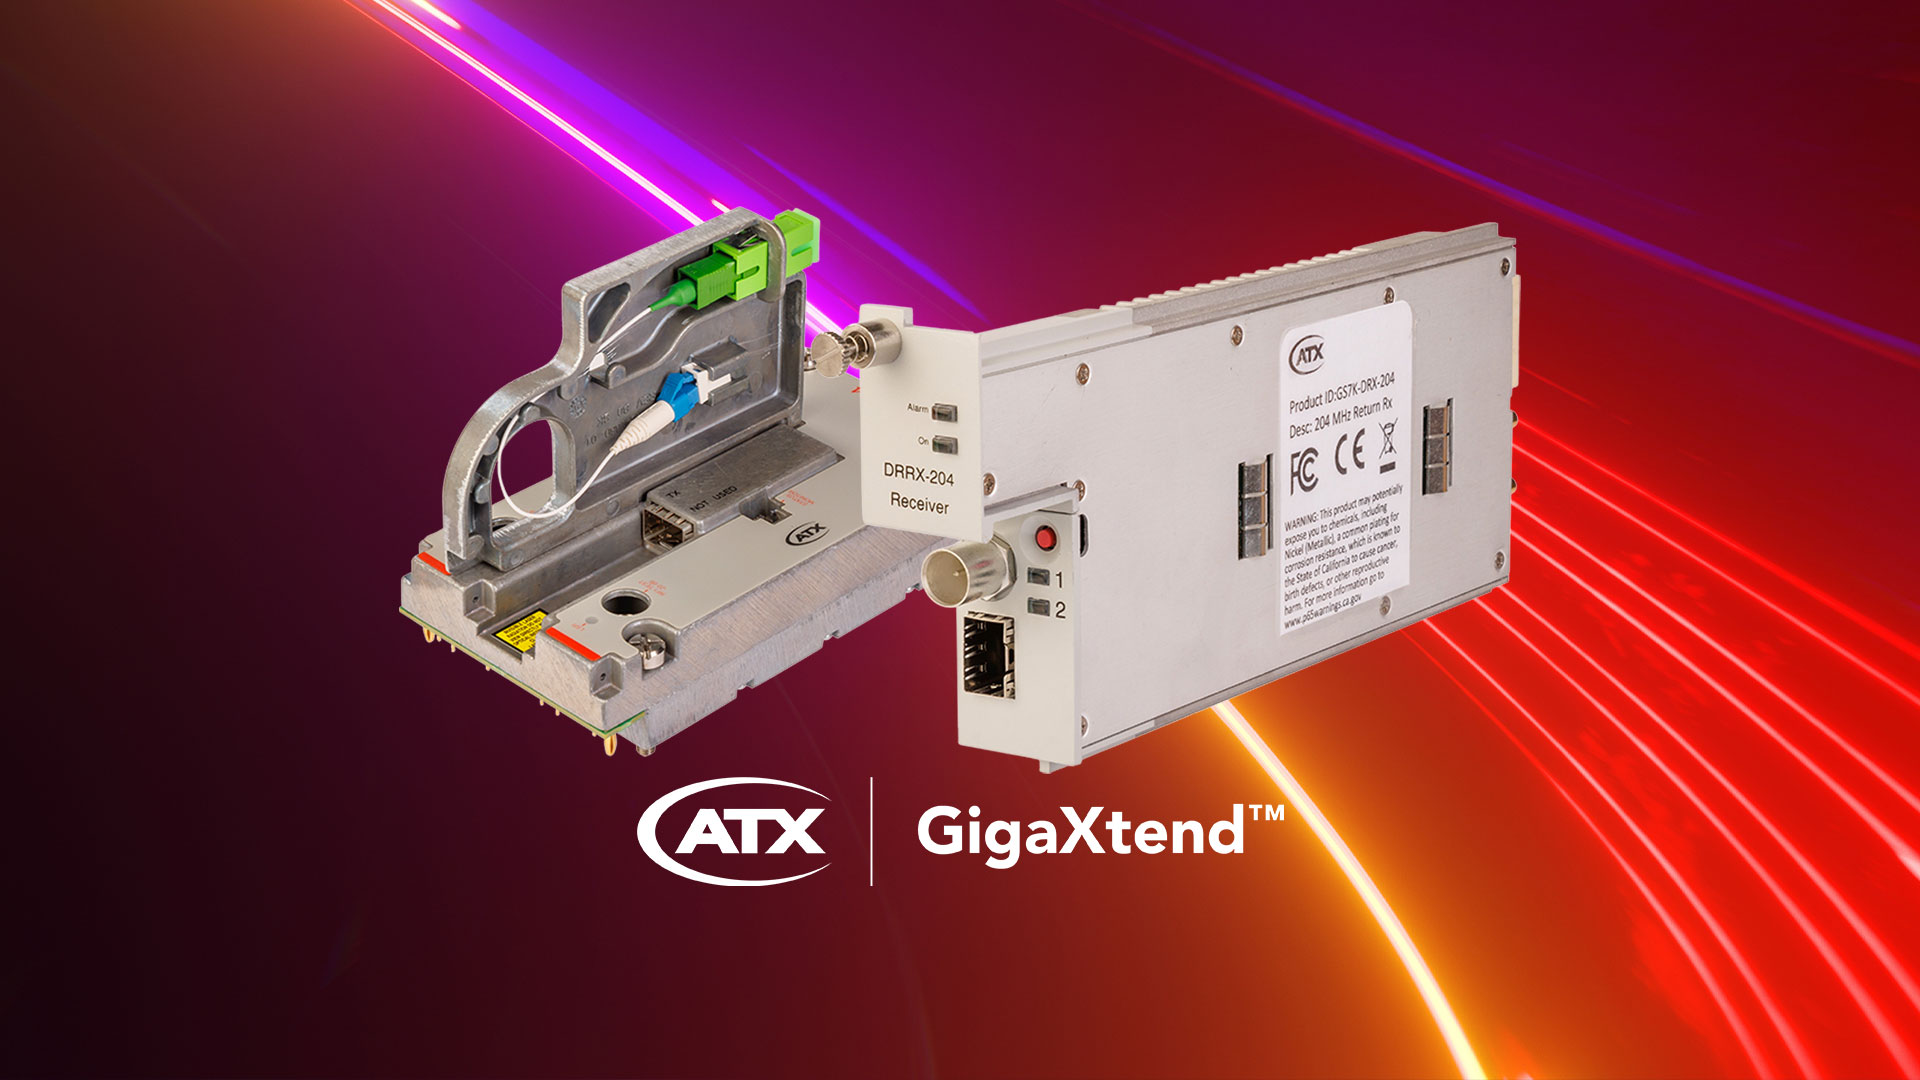 GigaXtend™ 204MHz Digital Return Transmitter Module, a plug-in for the Cisco® GS7000 Node, and the companion GigaXtend 204MHz Digital Return Receiver Module